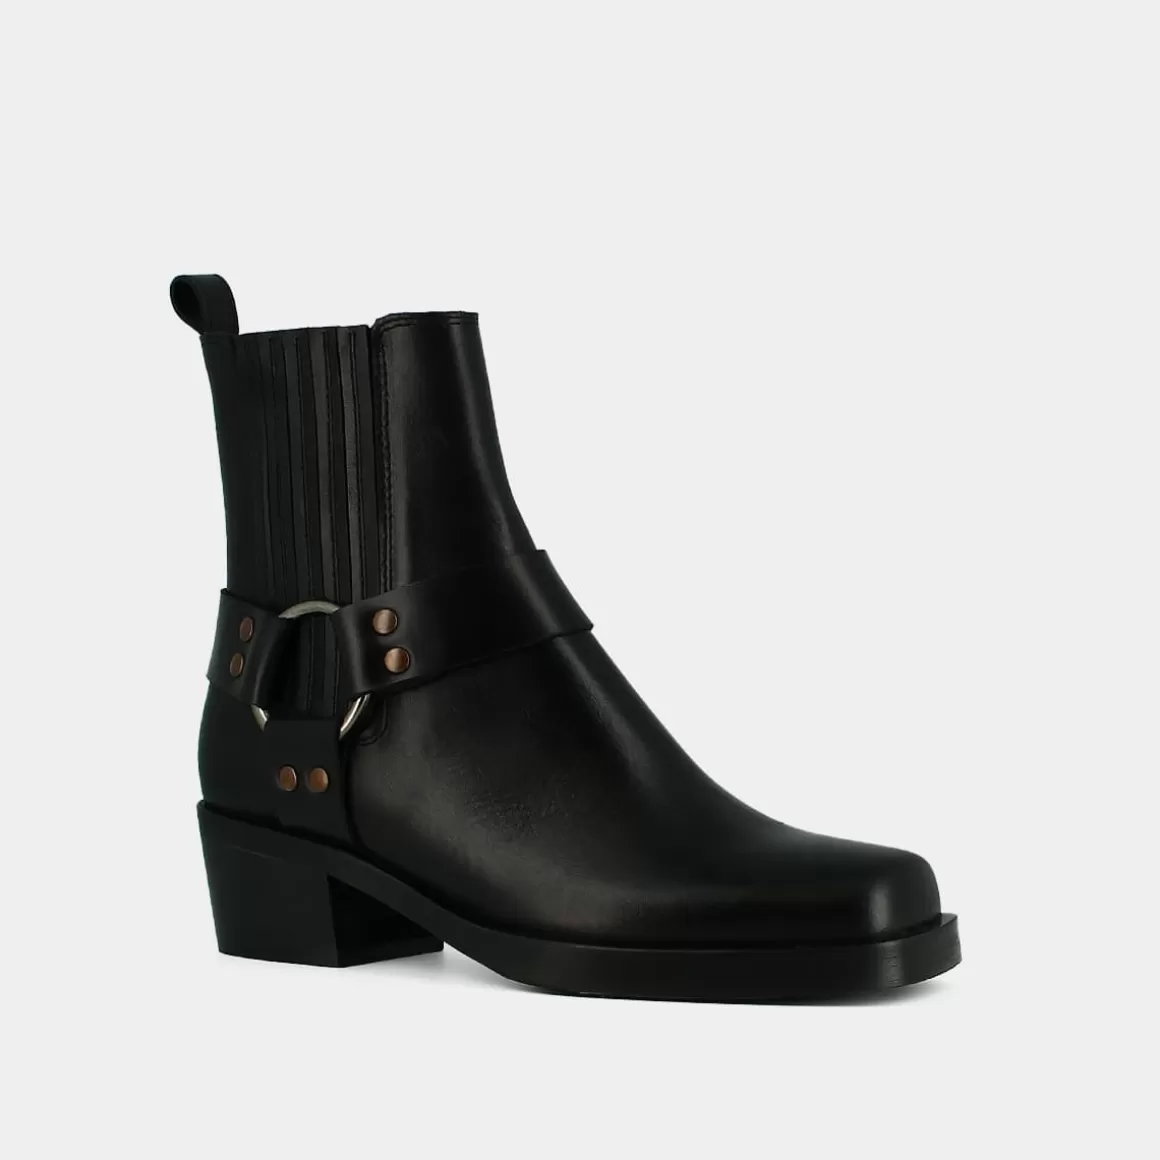 Ankle boots with buckles<Jonak Flash Sale